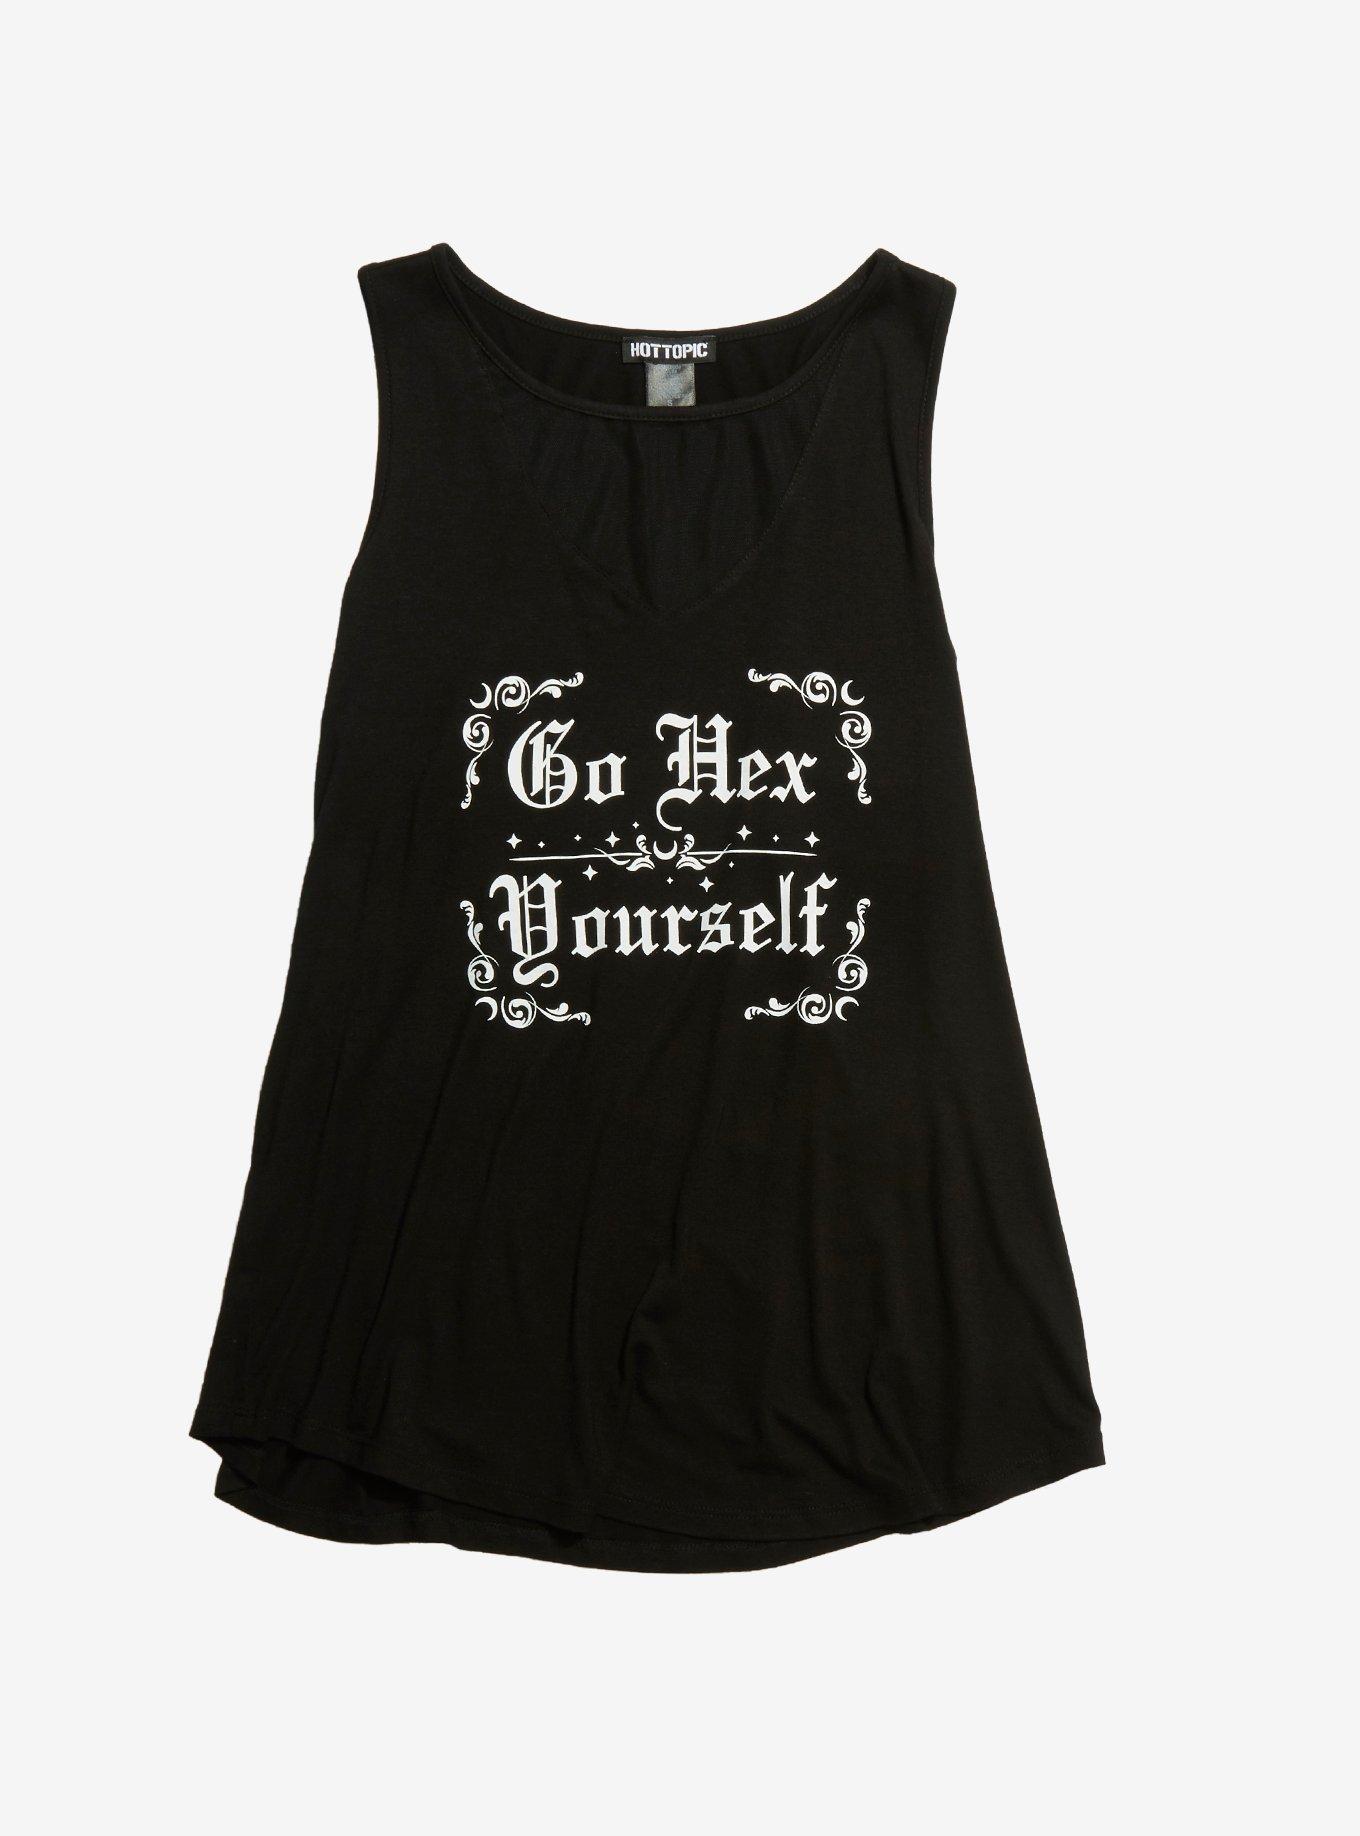 Go Hex Yourself Mesh Front Girls Tank Top Plus Size | Hot Topic